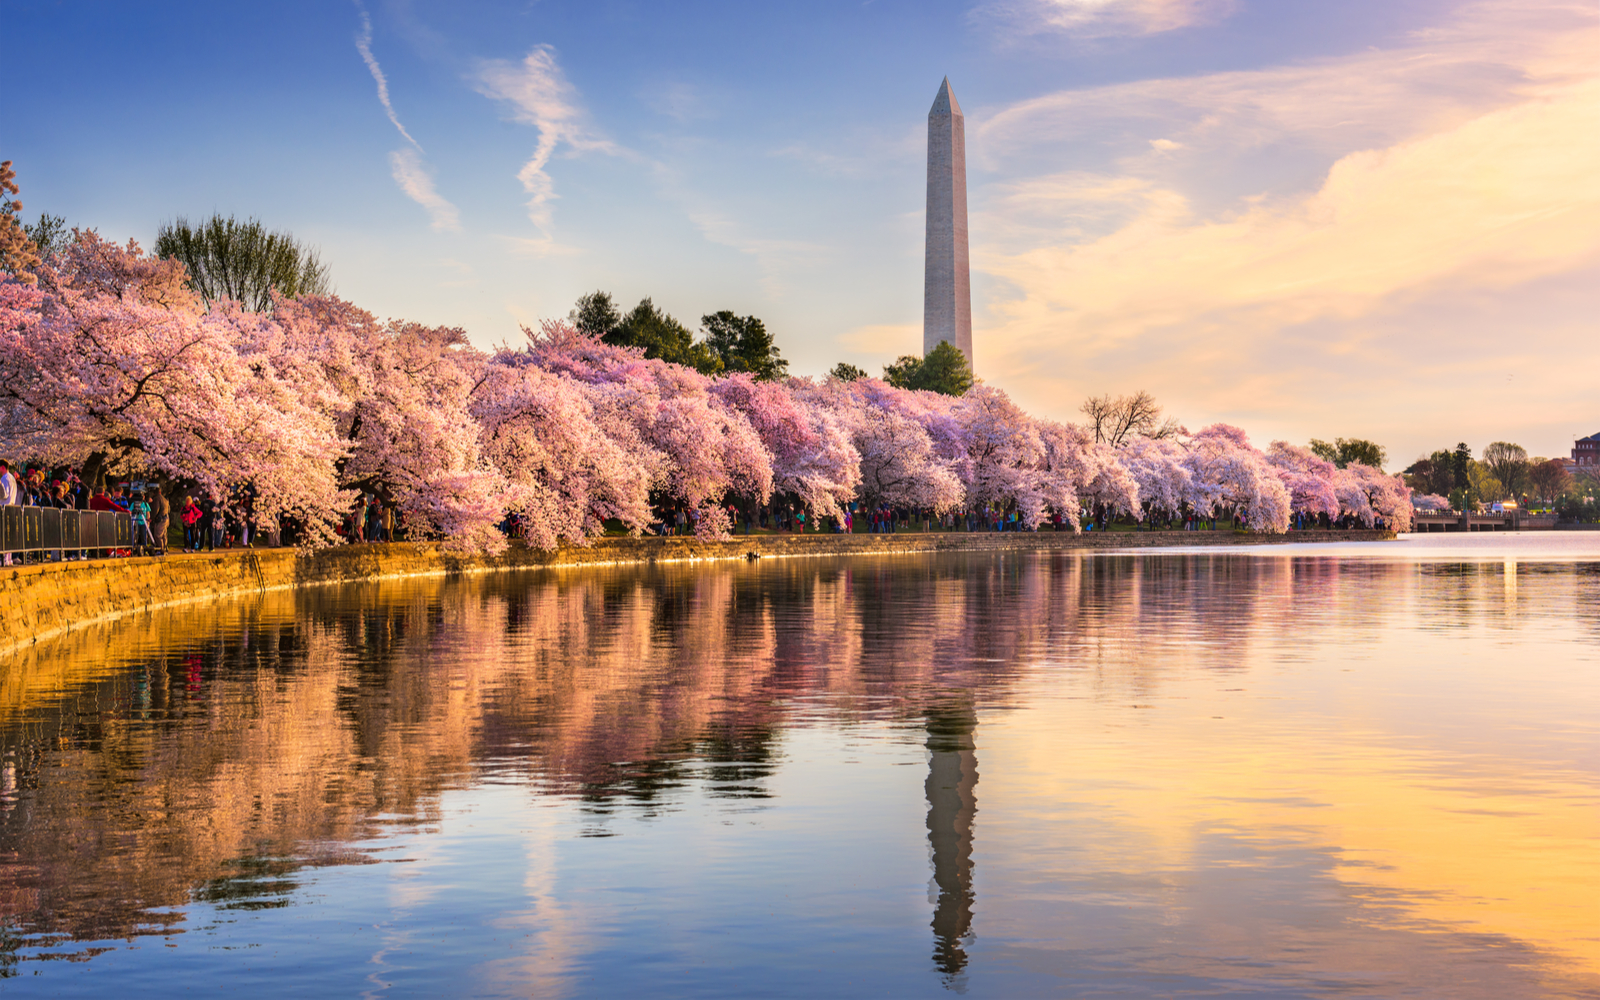 Featured image for post on the best time to visit Washington DC, cherry trees pictured blooming with pink flowers